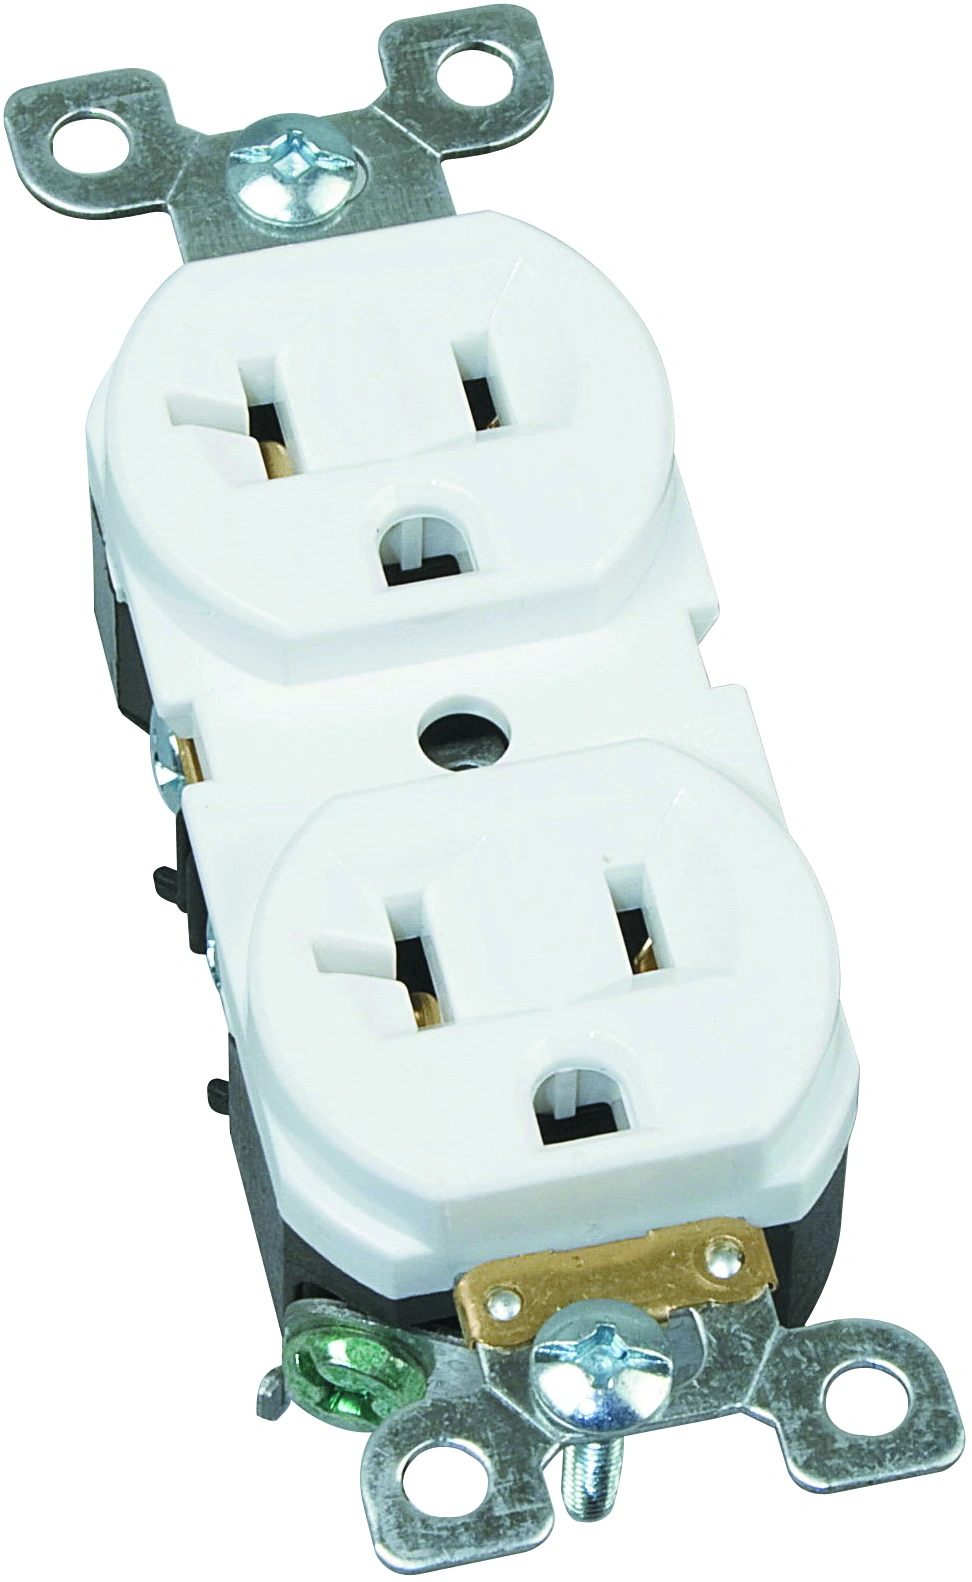 UL Listing, Stand Duplex Electrical Receptacle